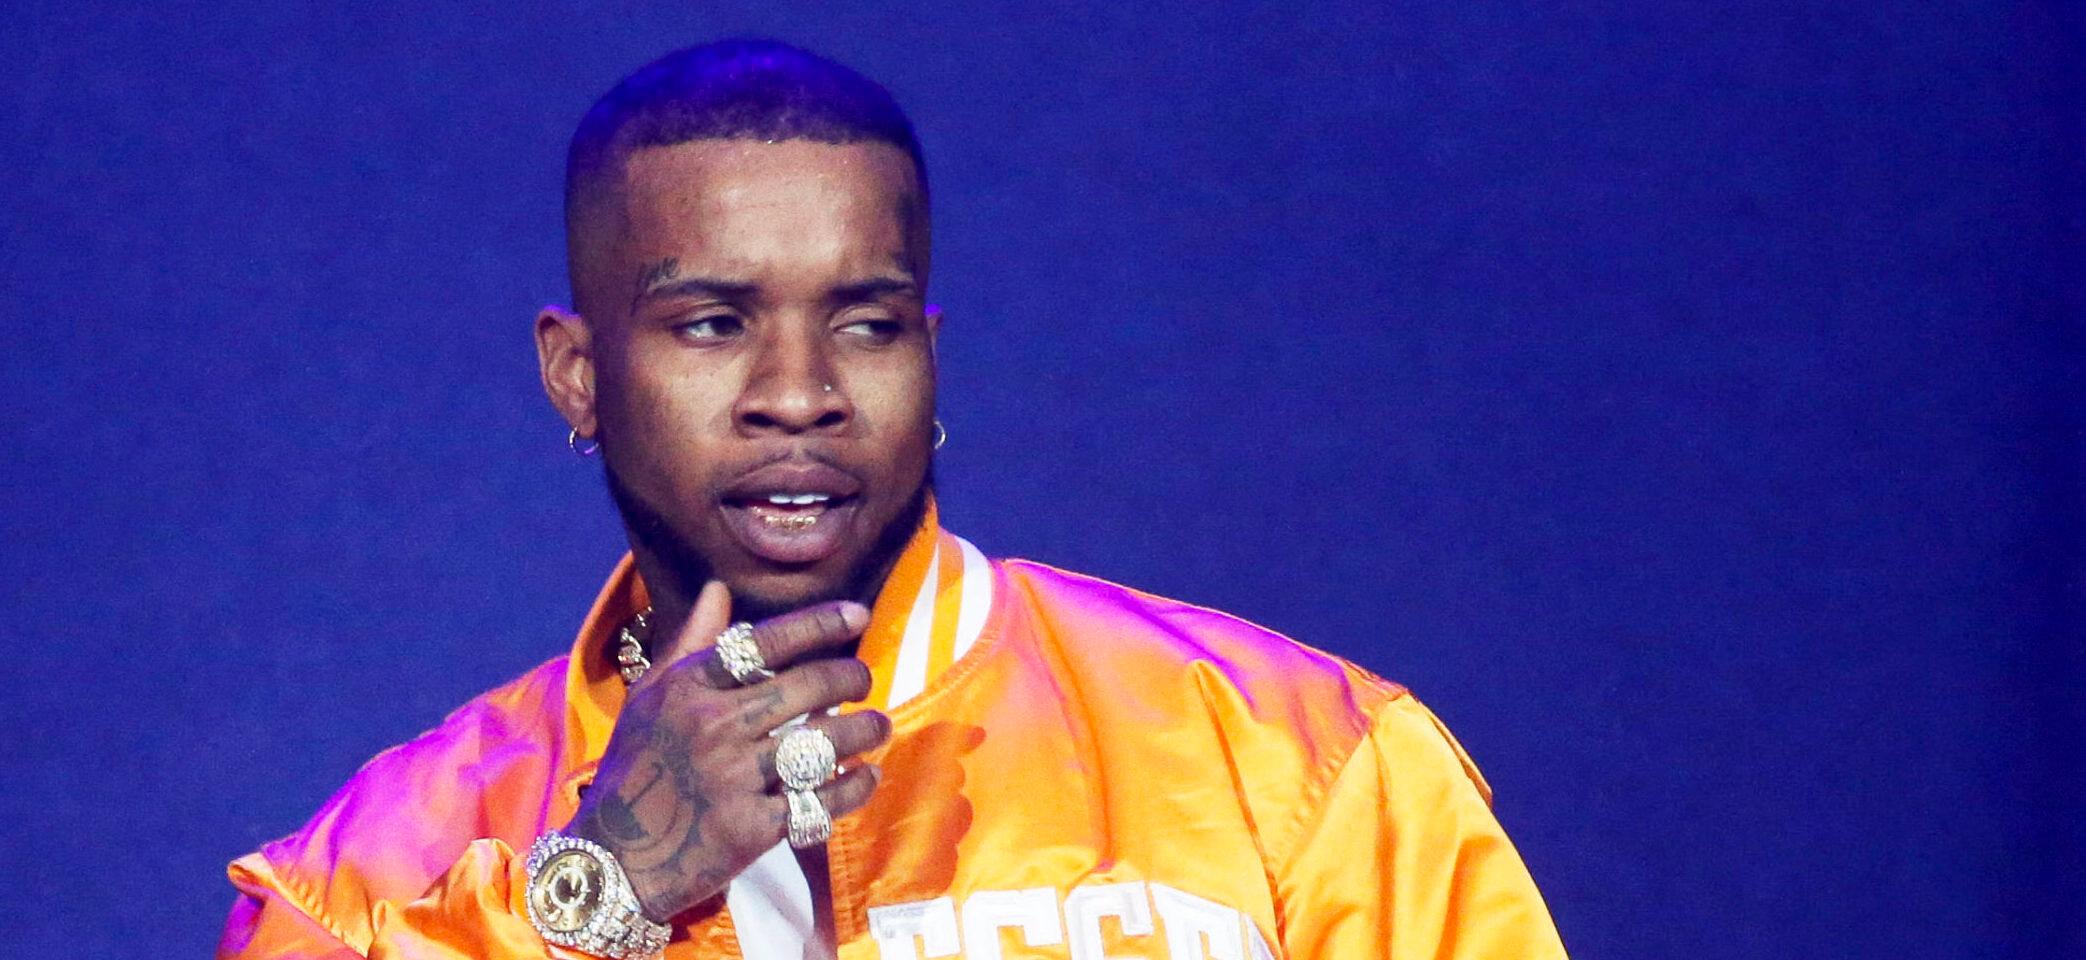 Tory Lanez Is Living A ‘Segregated’ Life In L.A. County Jail Pending Transfer To Prison For His 10-Year Sentence